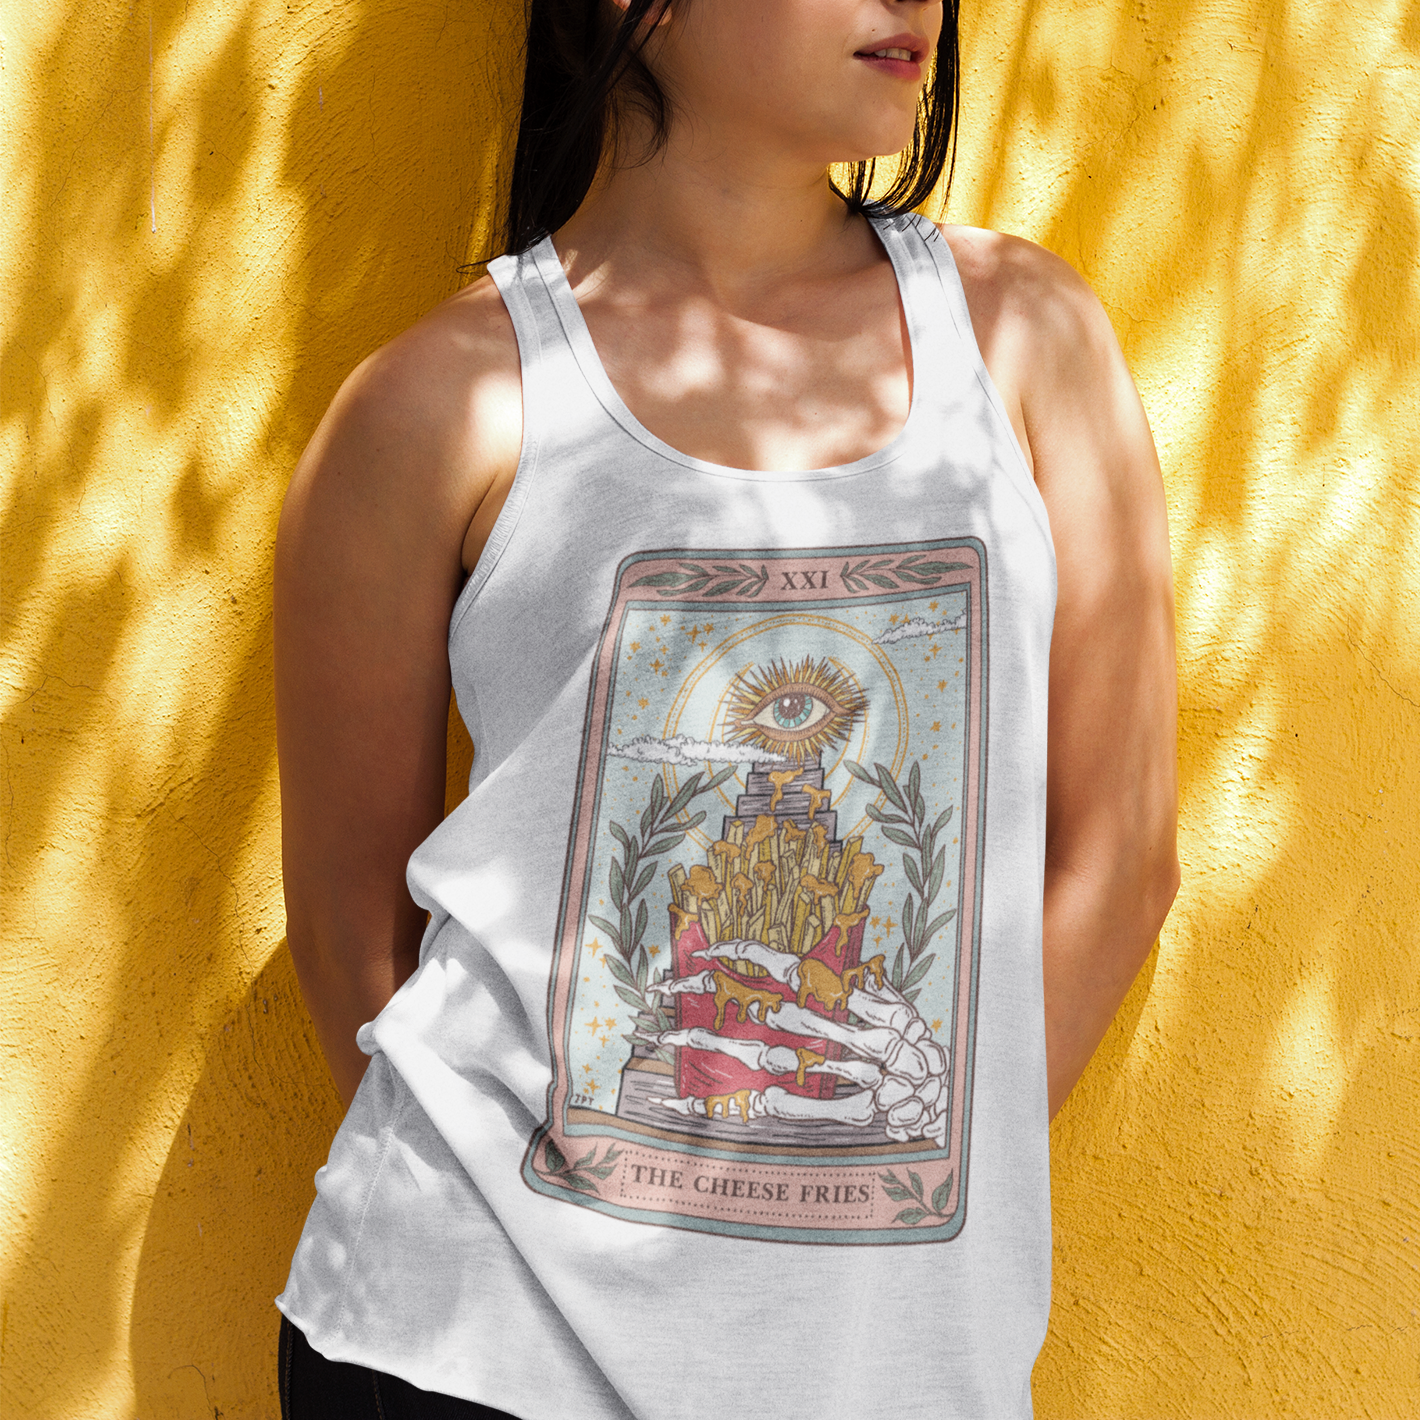 « THE CHEESE FRIES » WOMEN'S SLOUCHY or RACERBACK TANK